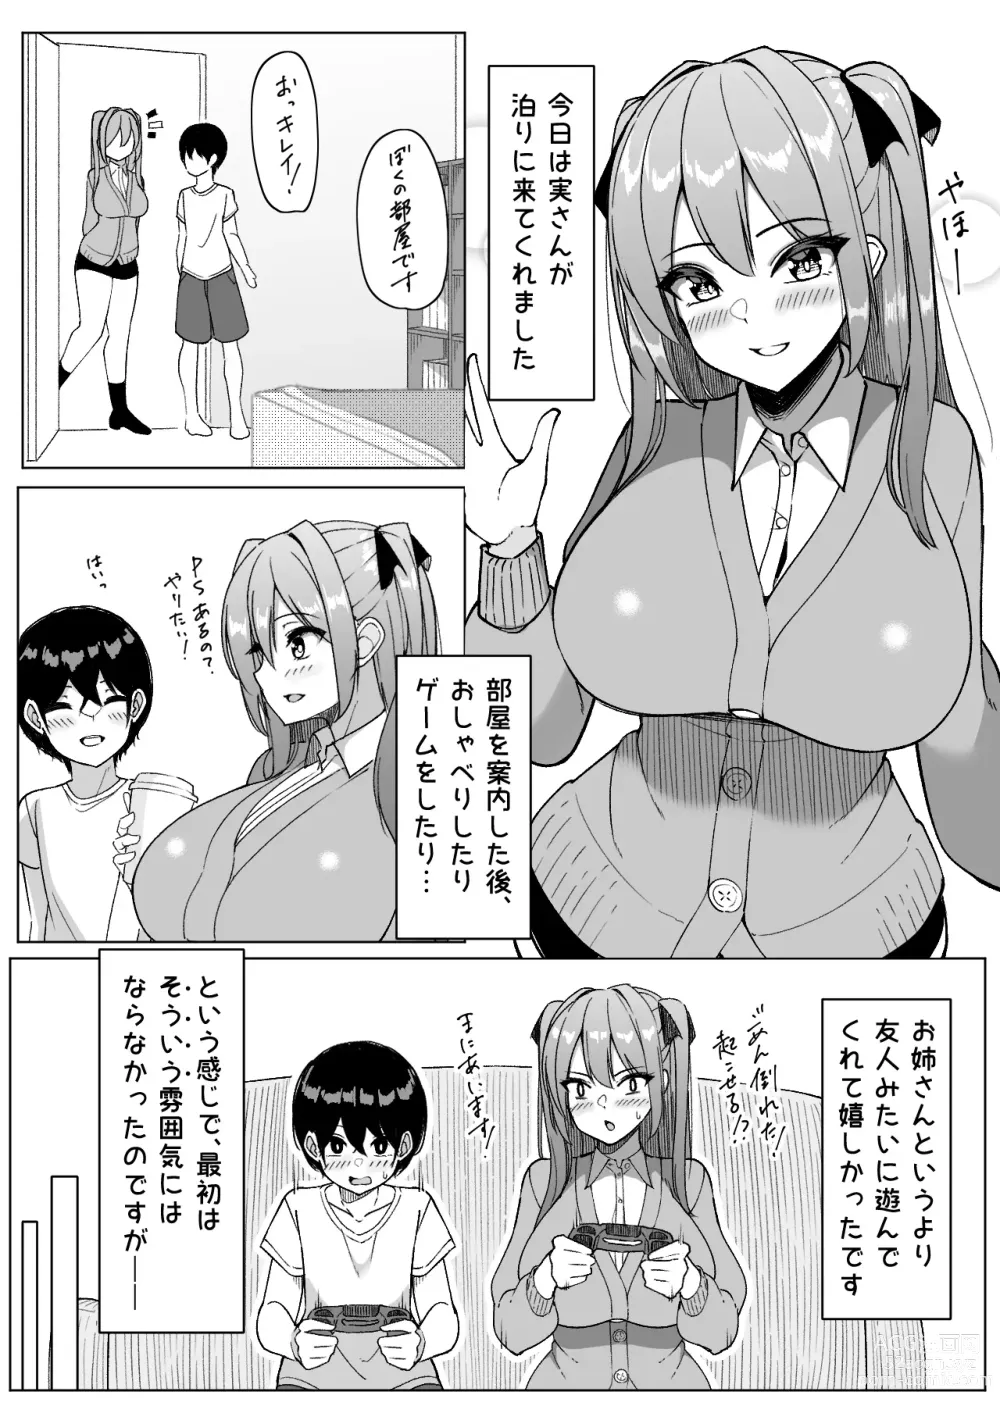 Page 21 of doujinshi Daily Sleepover With Big-breasted Girls